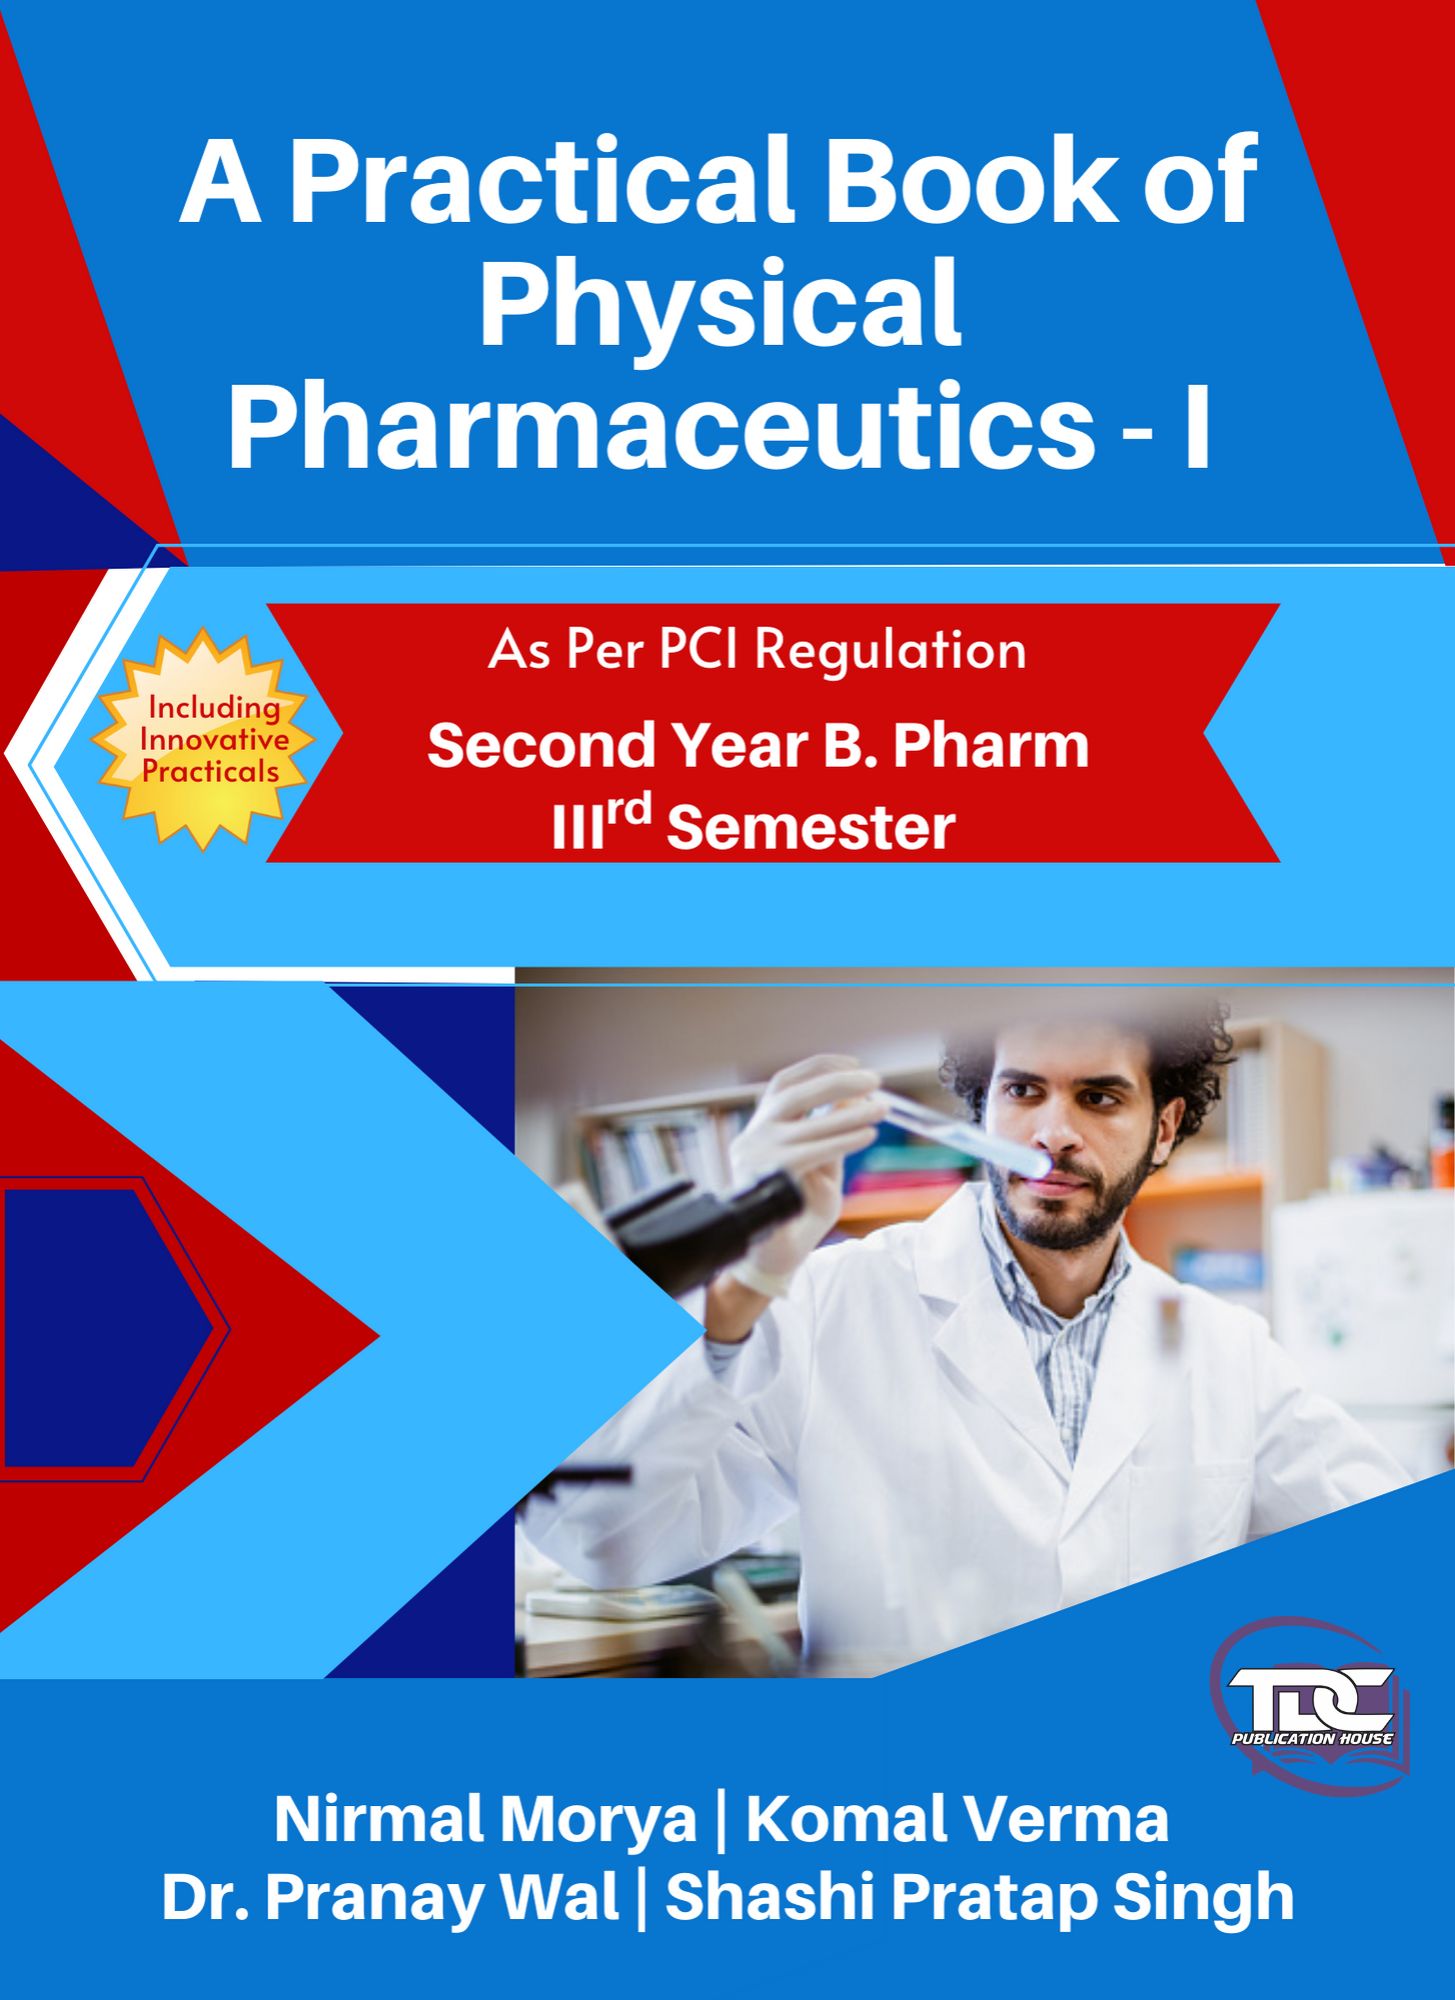 A Practical Book of Physical Pharmaceutics - I